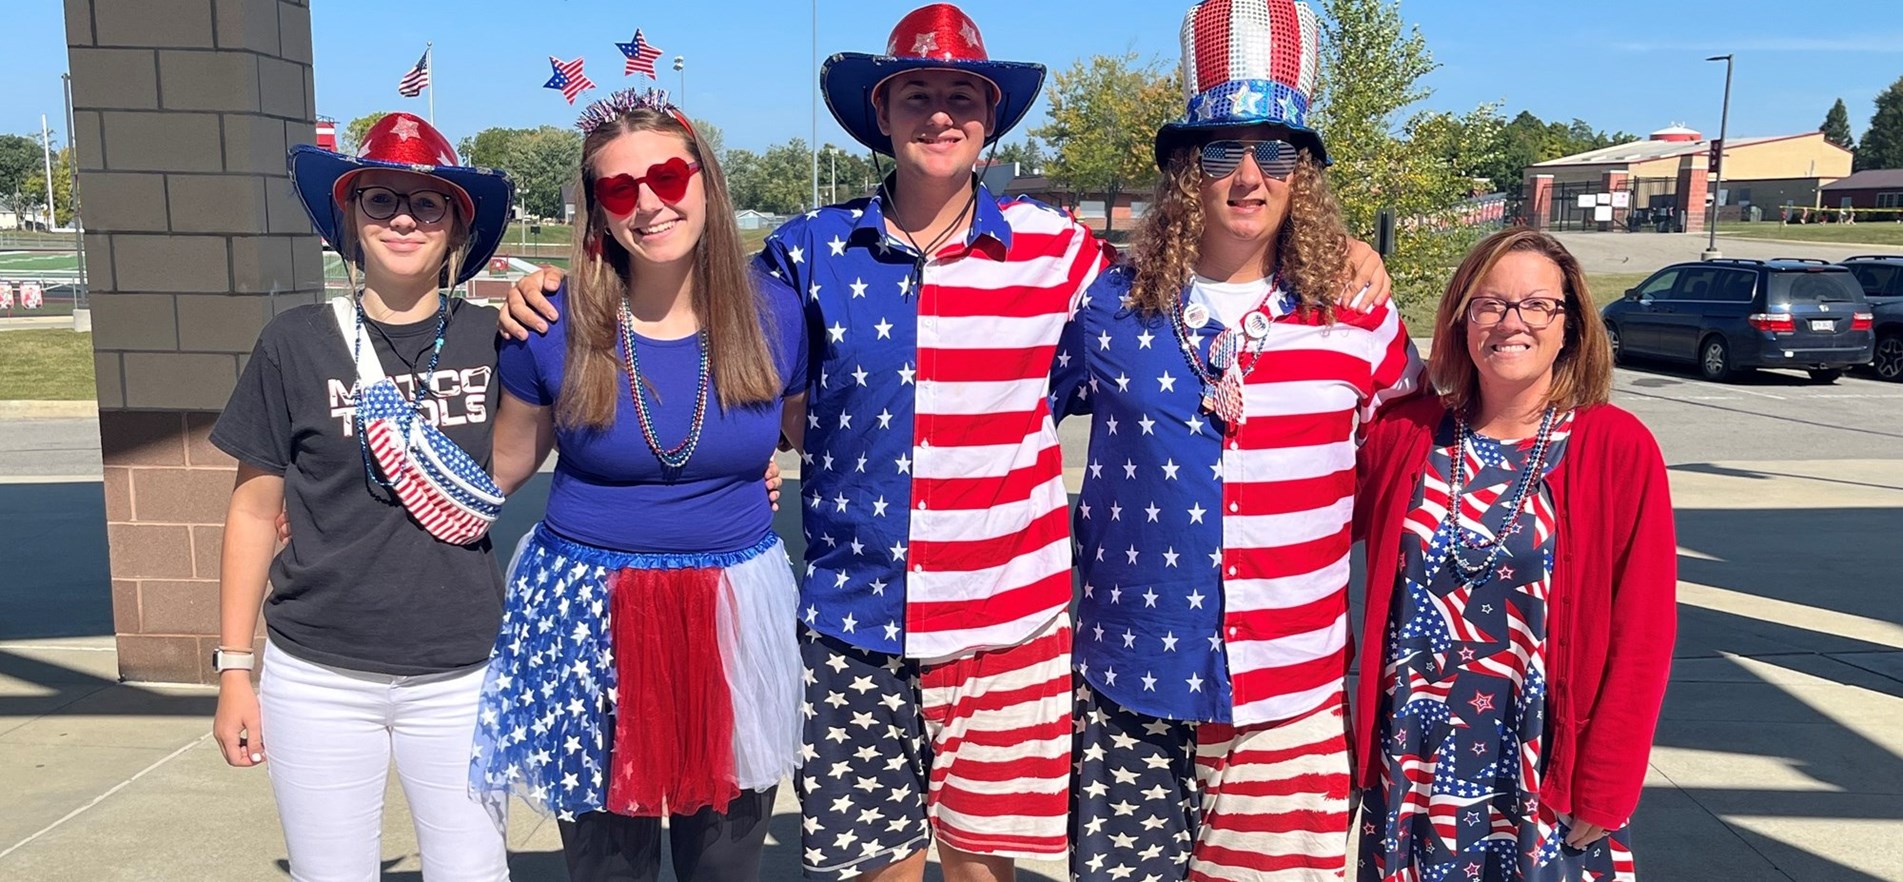 A quintet of staff and student body members wear patriotic clothing for special spirit day